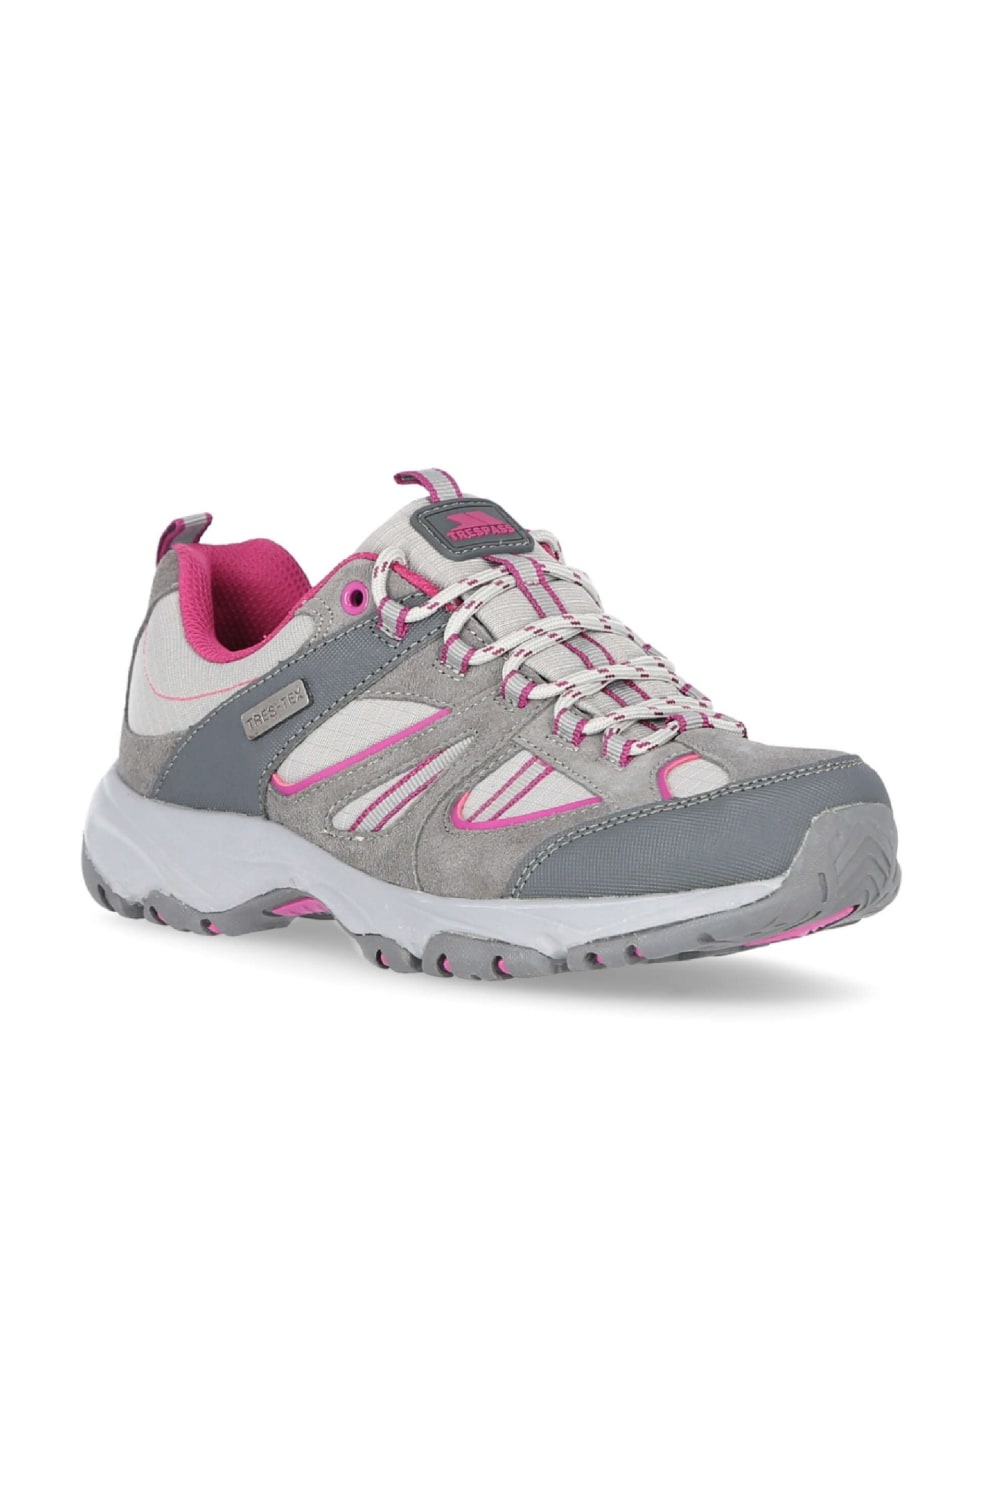 Womens/Ladies Jamima Lace Up Running Trainers Shoe